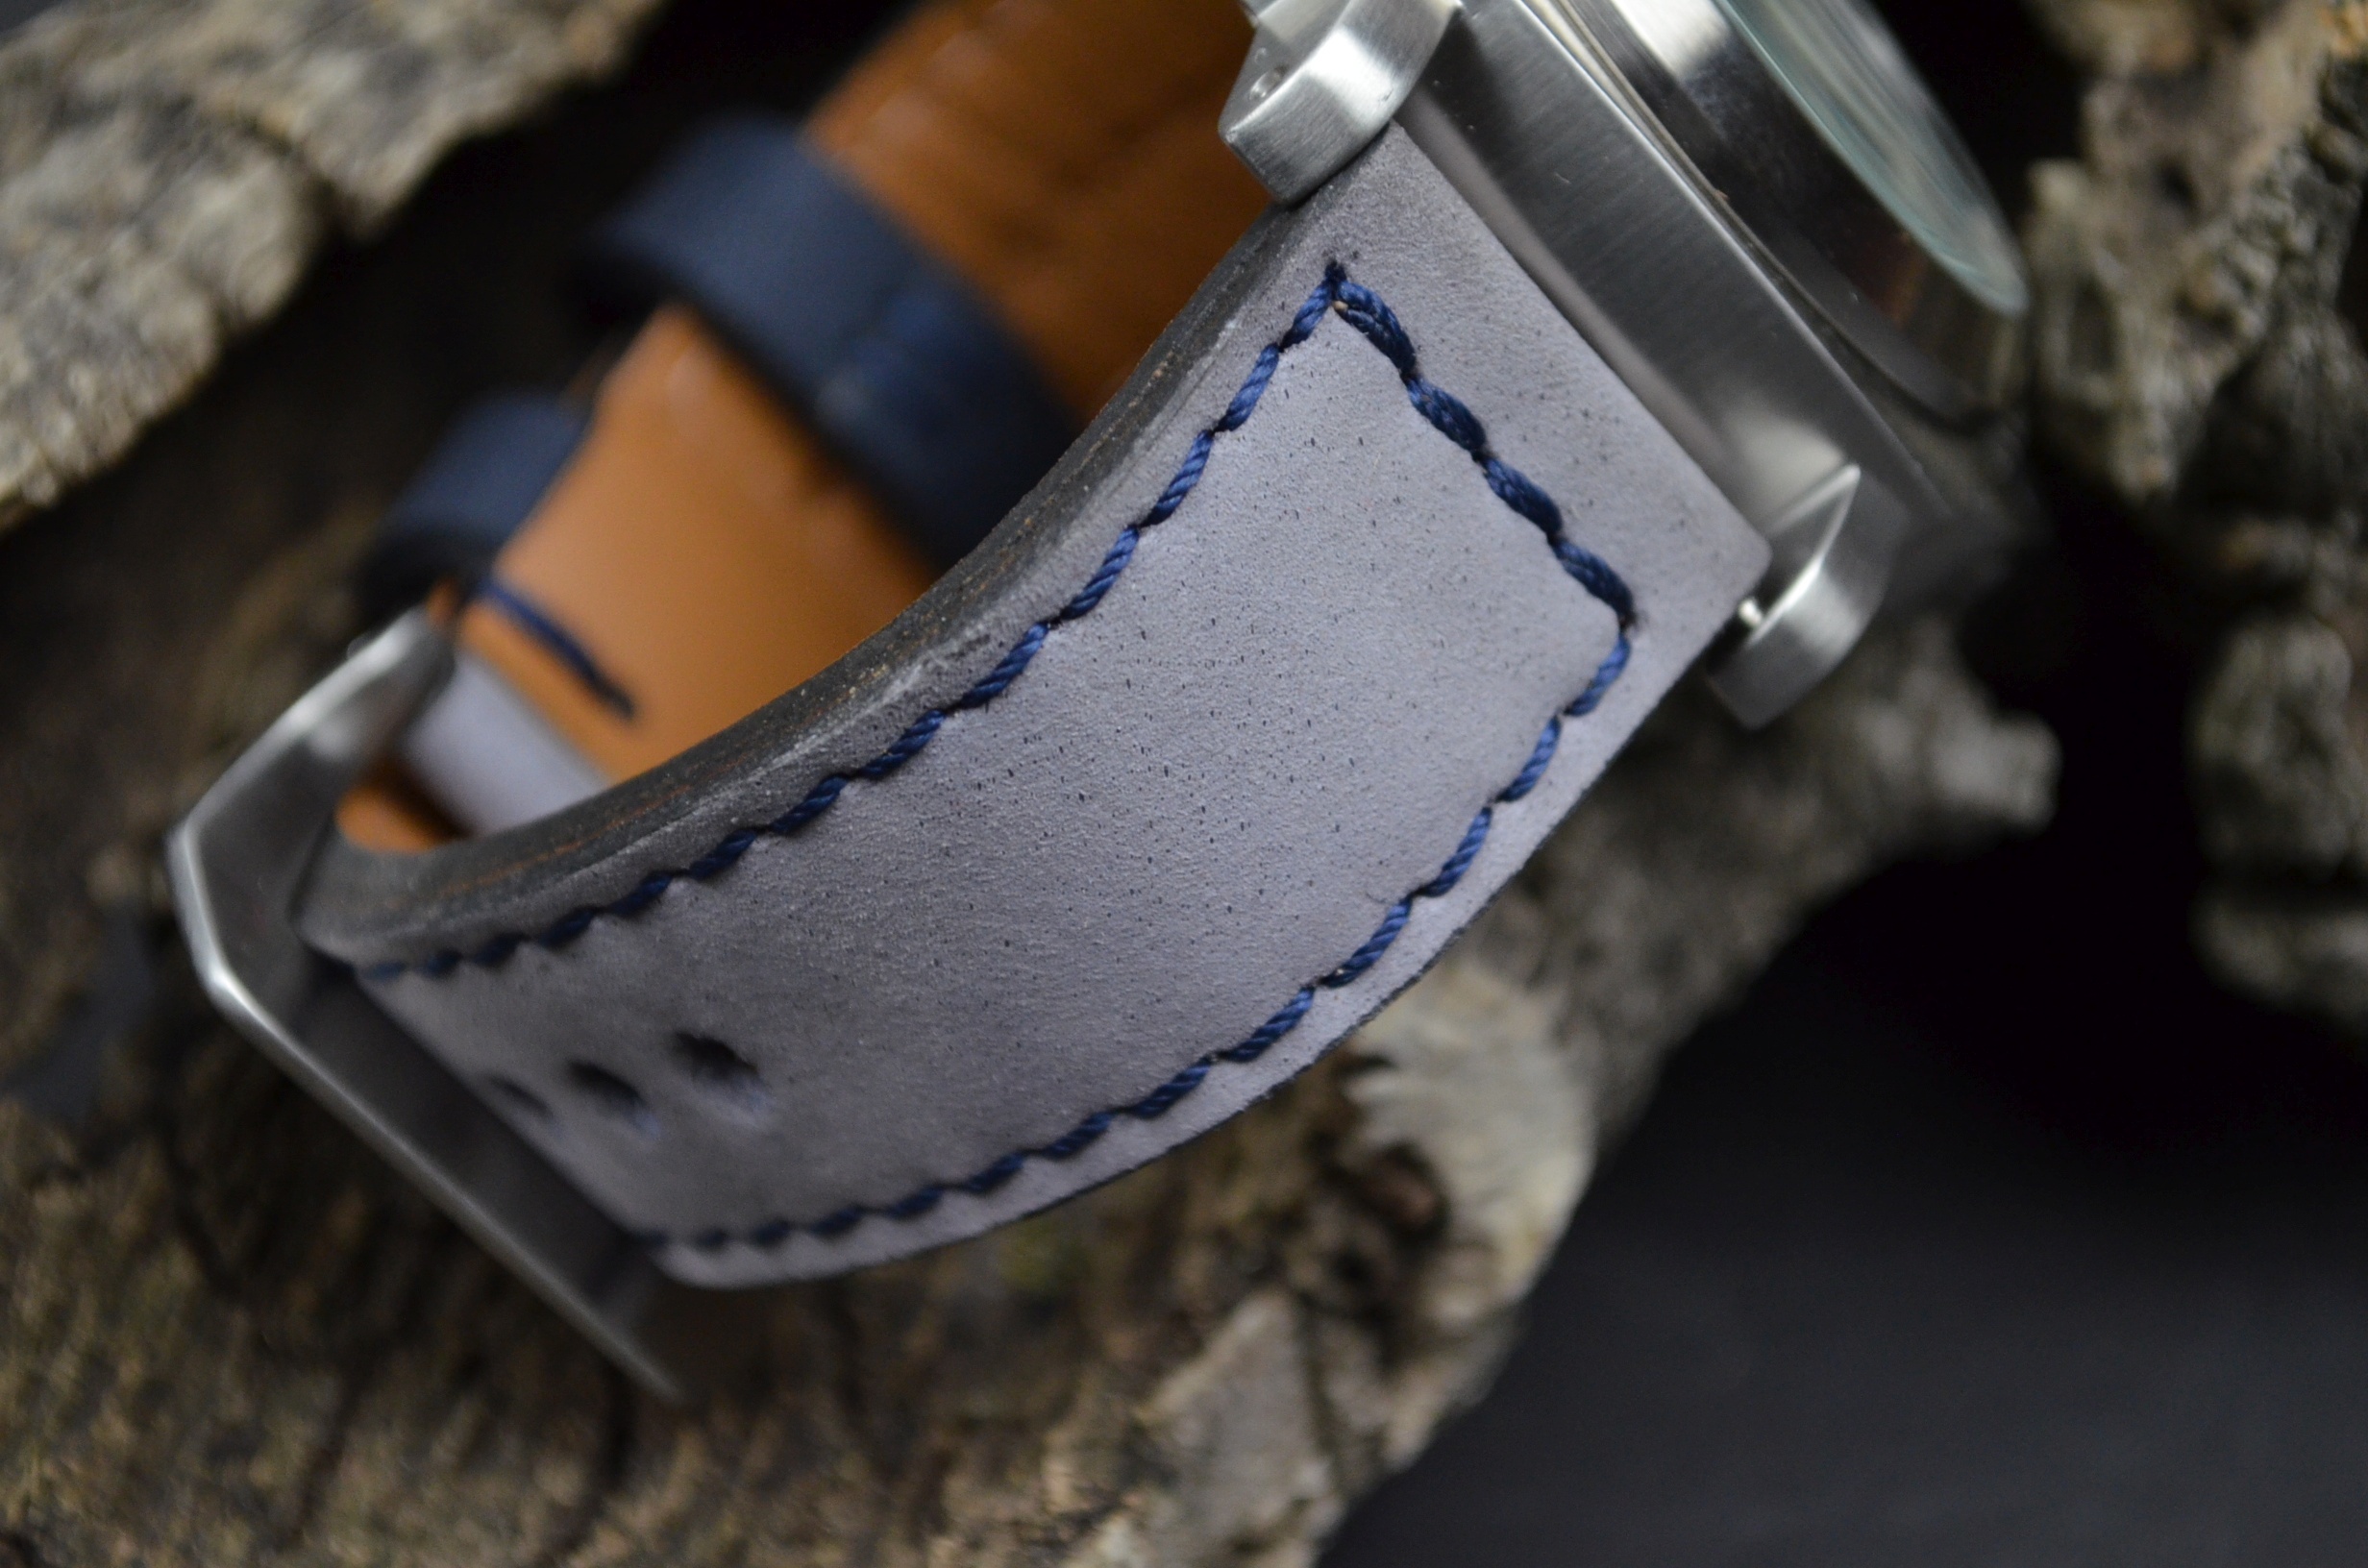 GREY BLUE is one of our hand crafted watch straps. Available in grey blue color, 3.5 - 4 mm thick.